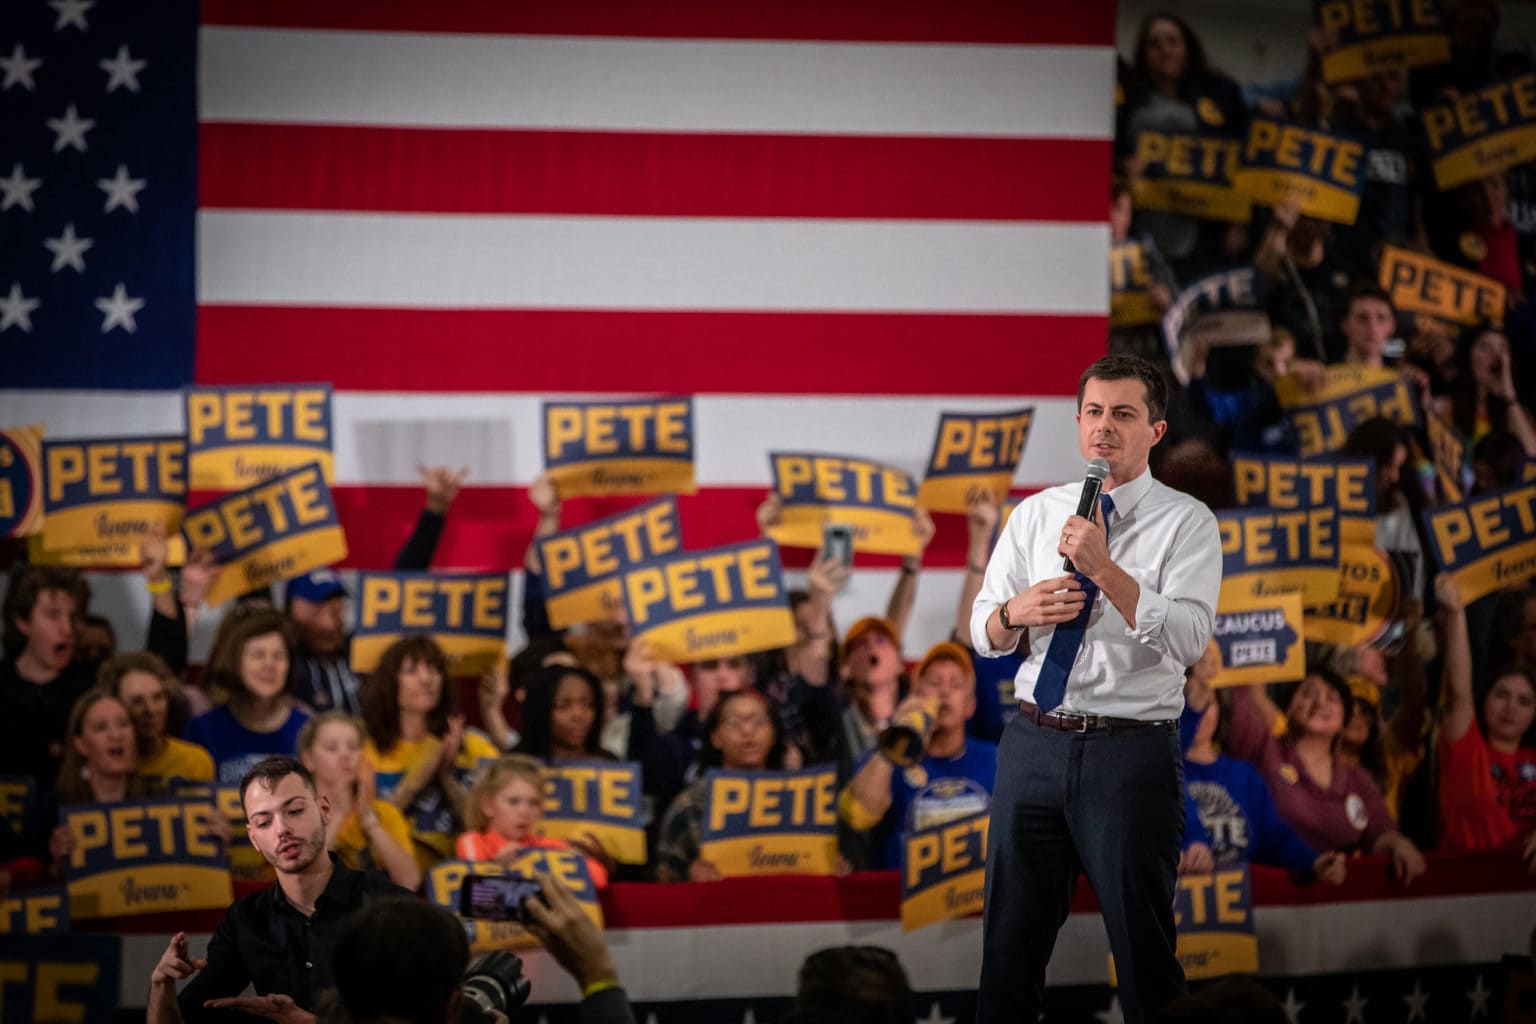 Democratic presidential candidate Pete Buttigieg addresses the crowd at a rally in Iowa.